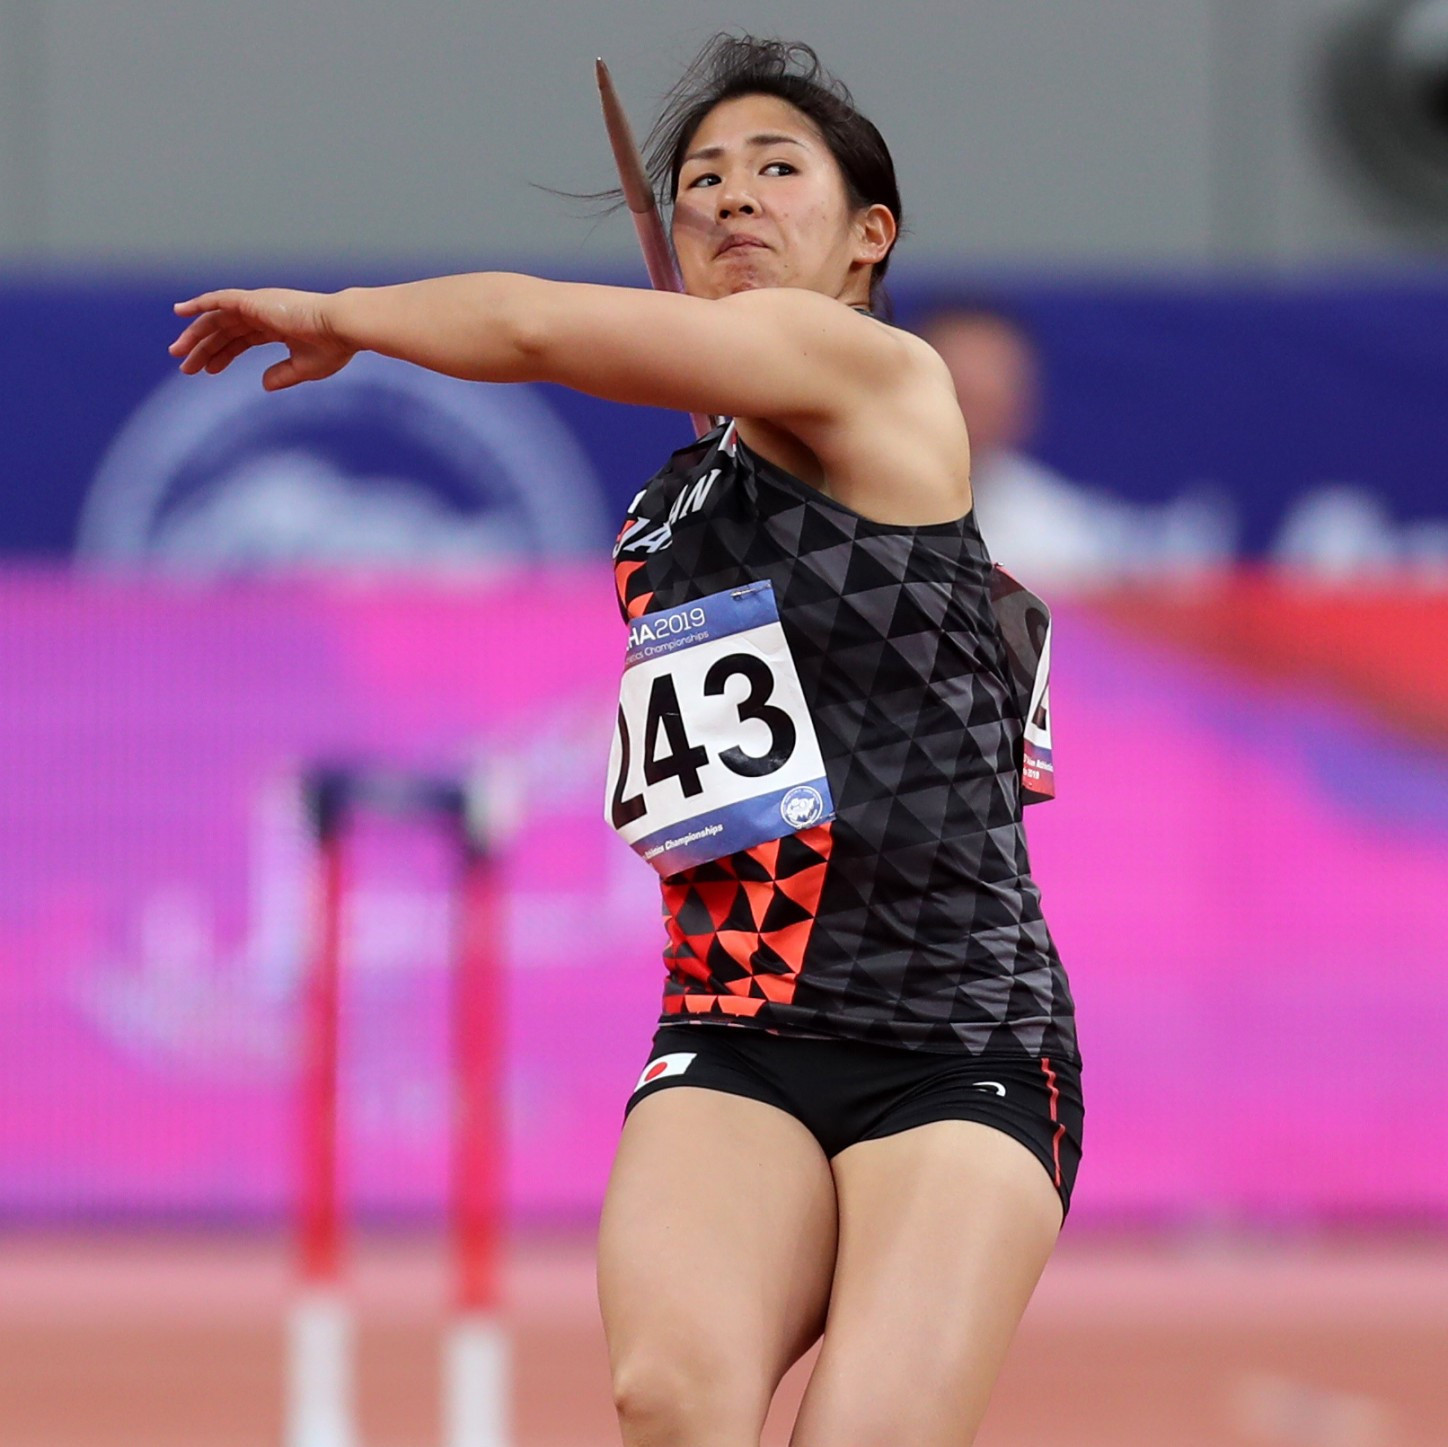 Shock defeat for Olympic javelin champion on opening day of Asian Athletics Championships